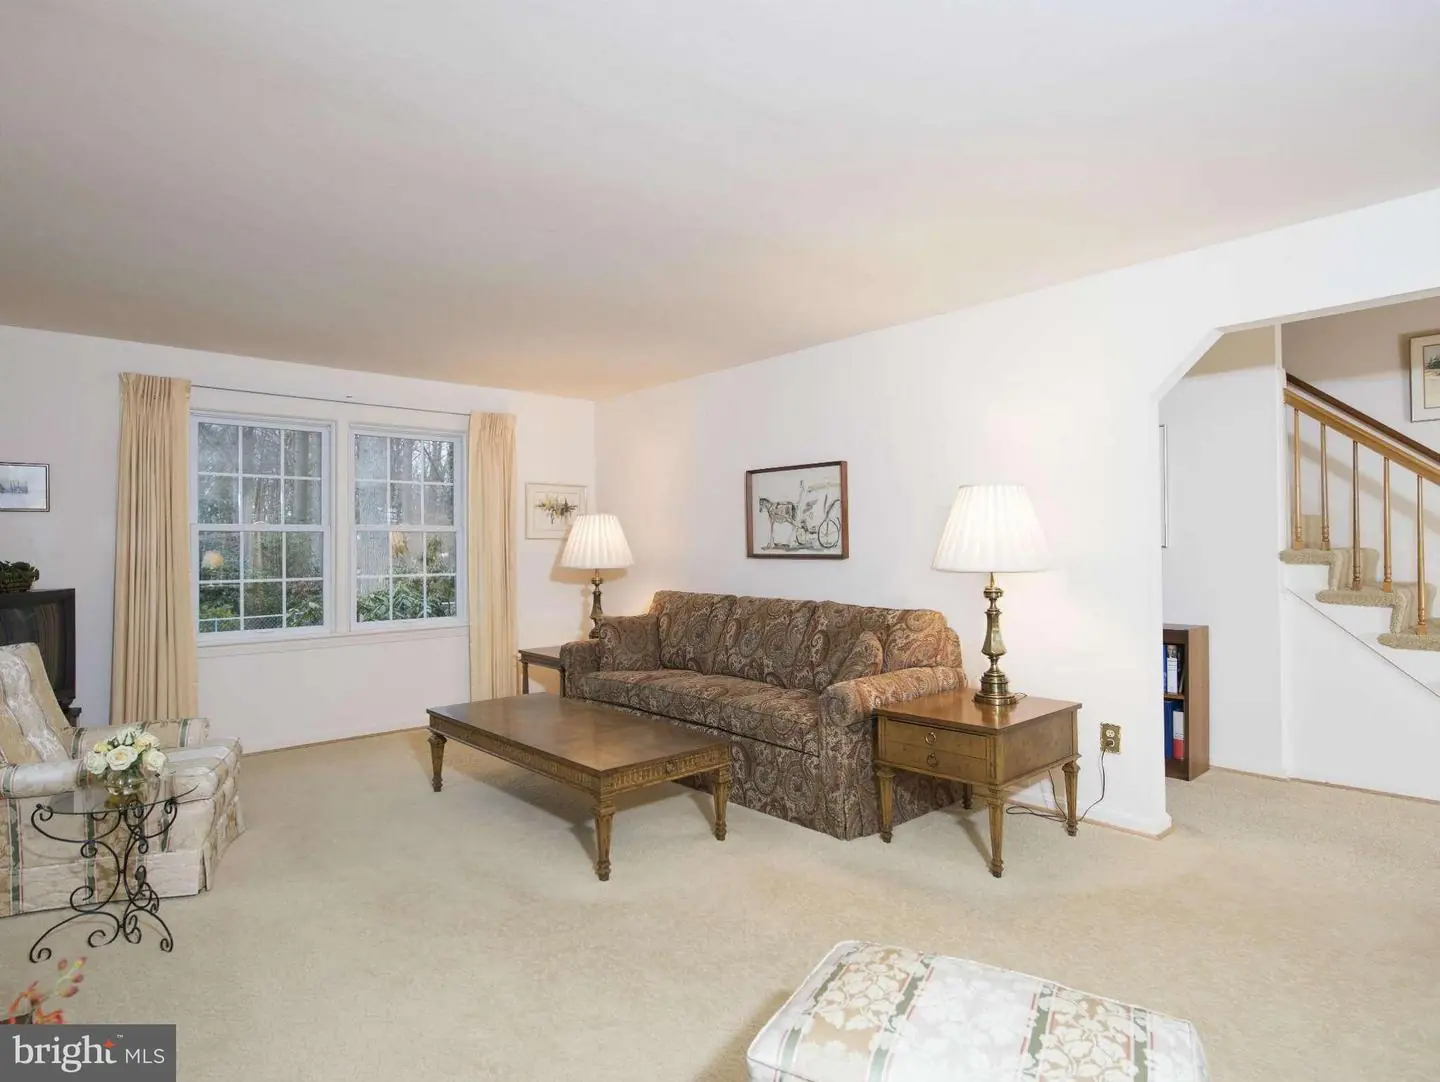 1002853862-300795236695-2021-09-07-11-45-05  |   | Falls Church Delaware Real Estate For Sale | MLS# 1002853862  - Best of Northern Virginia